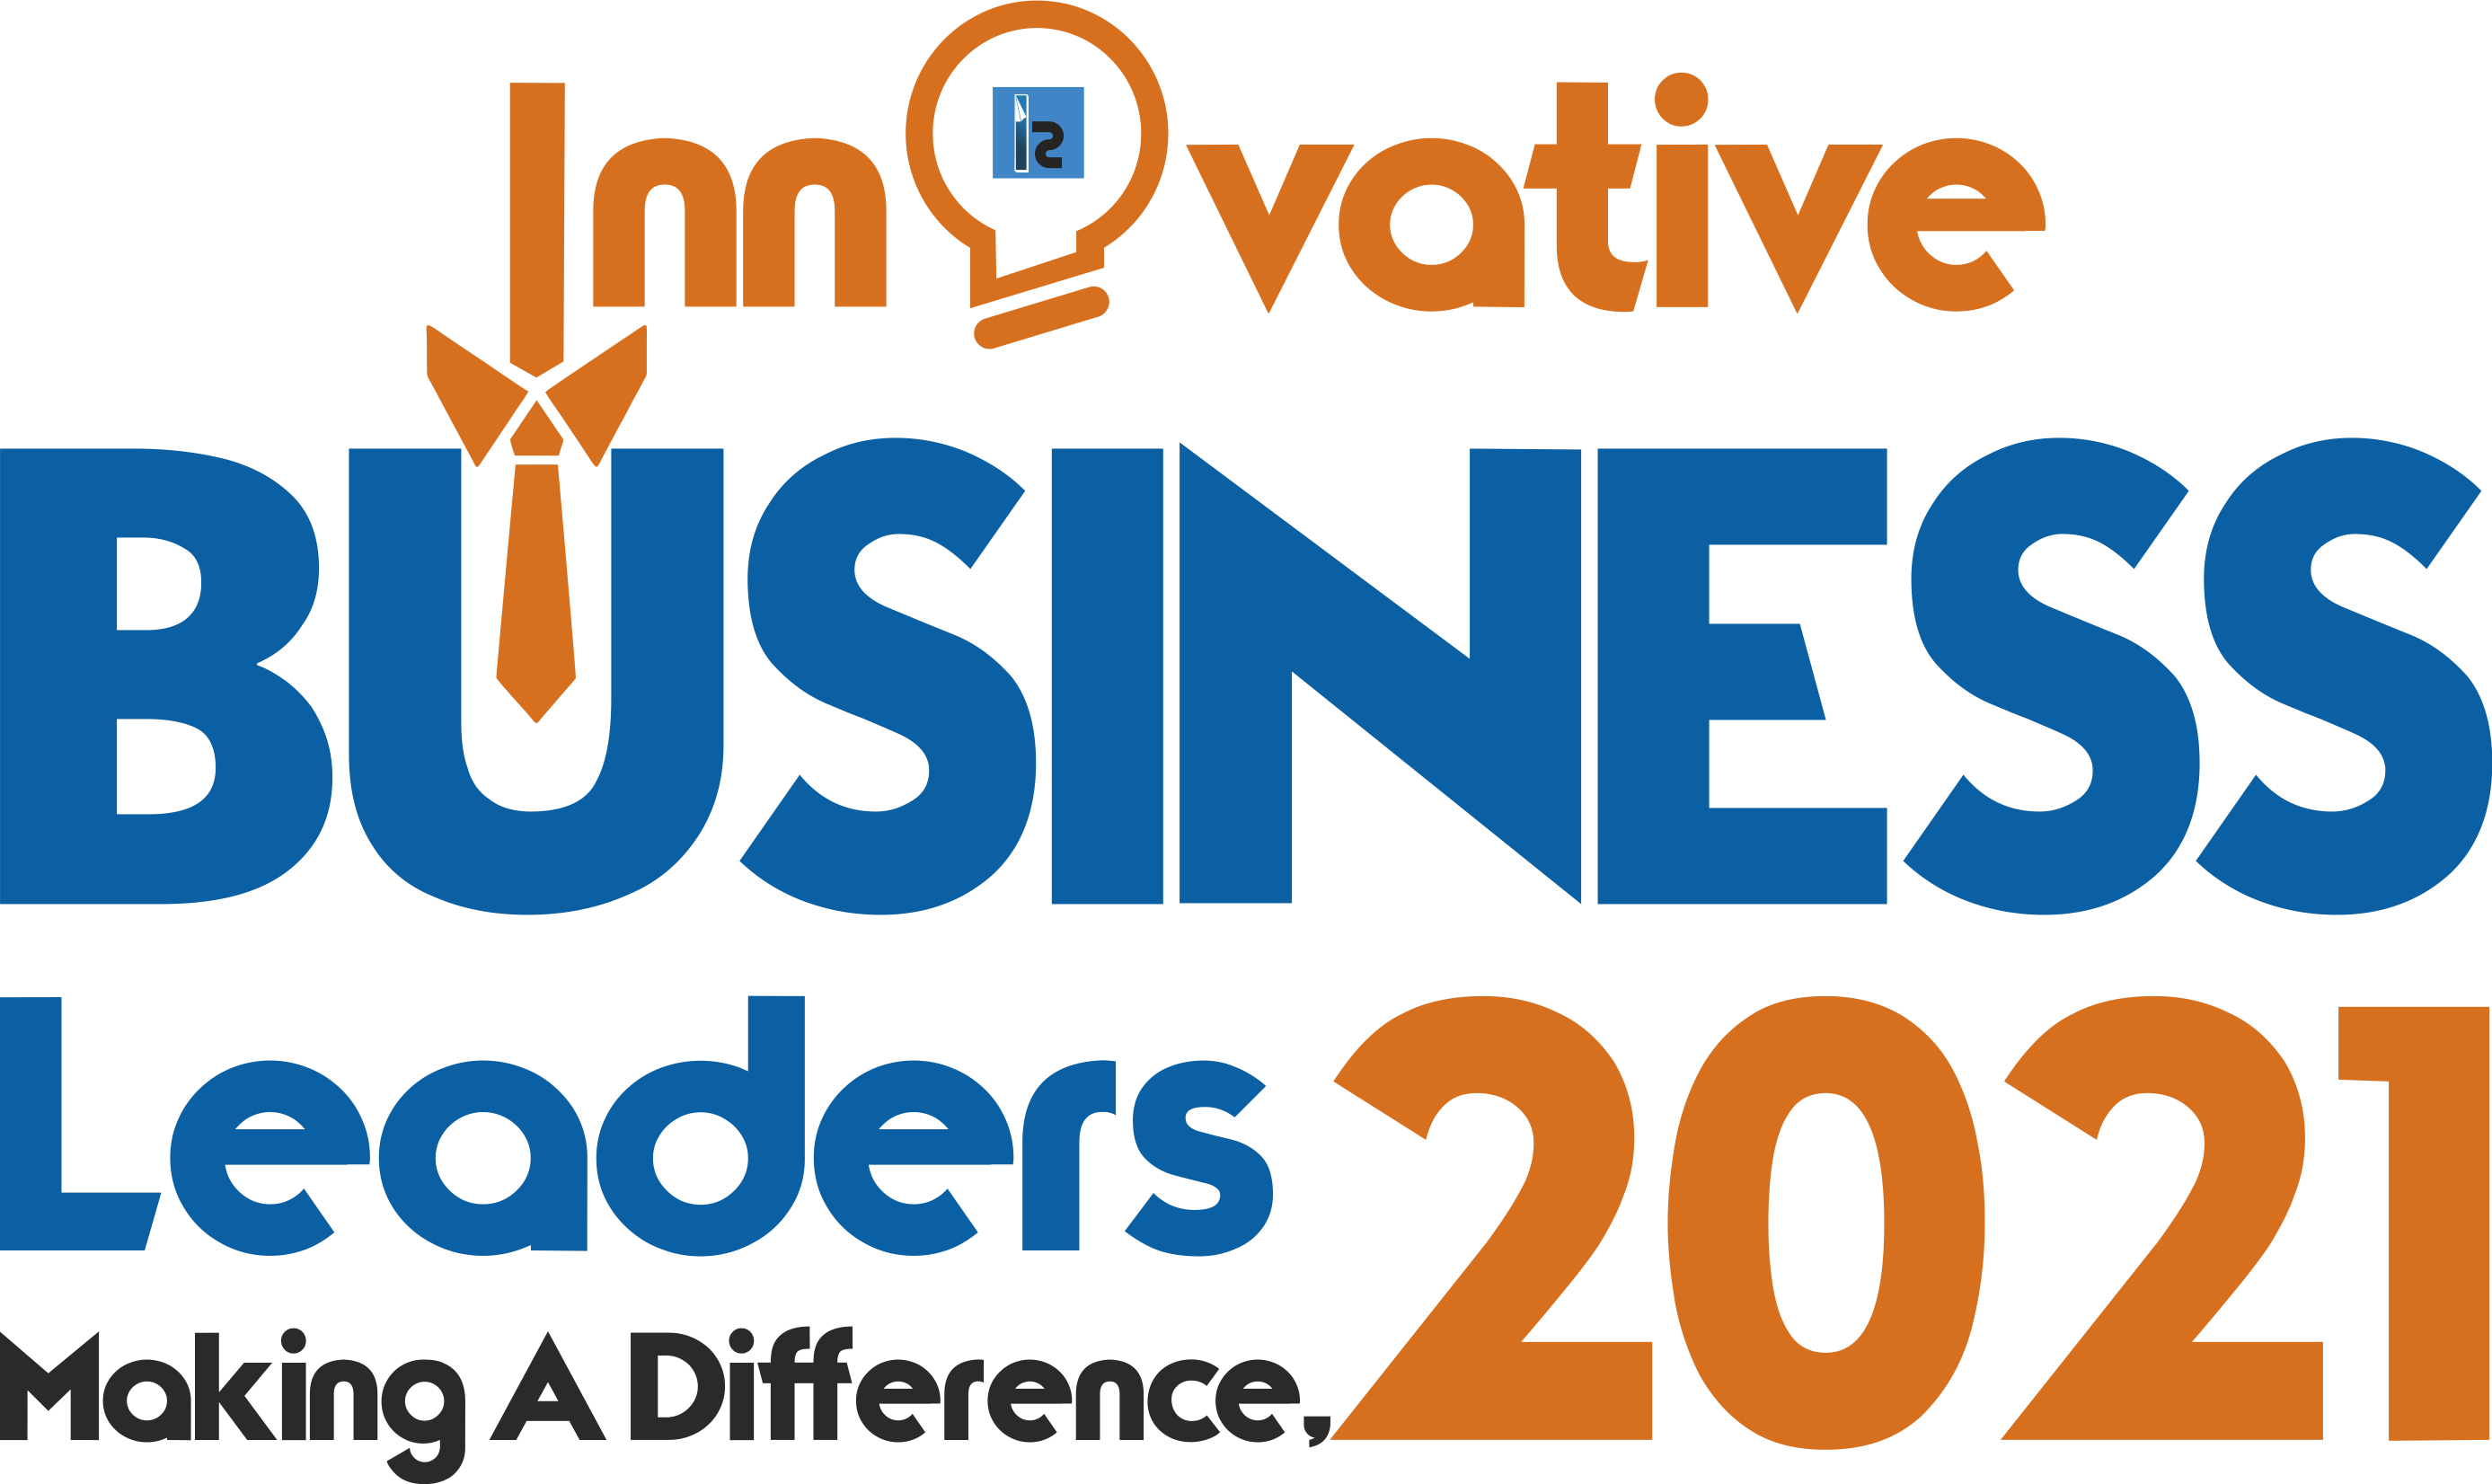 Innovative Business Leaders Making a Difference, 2021